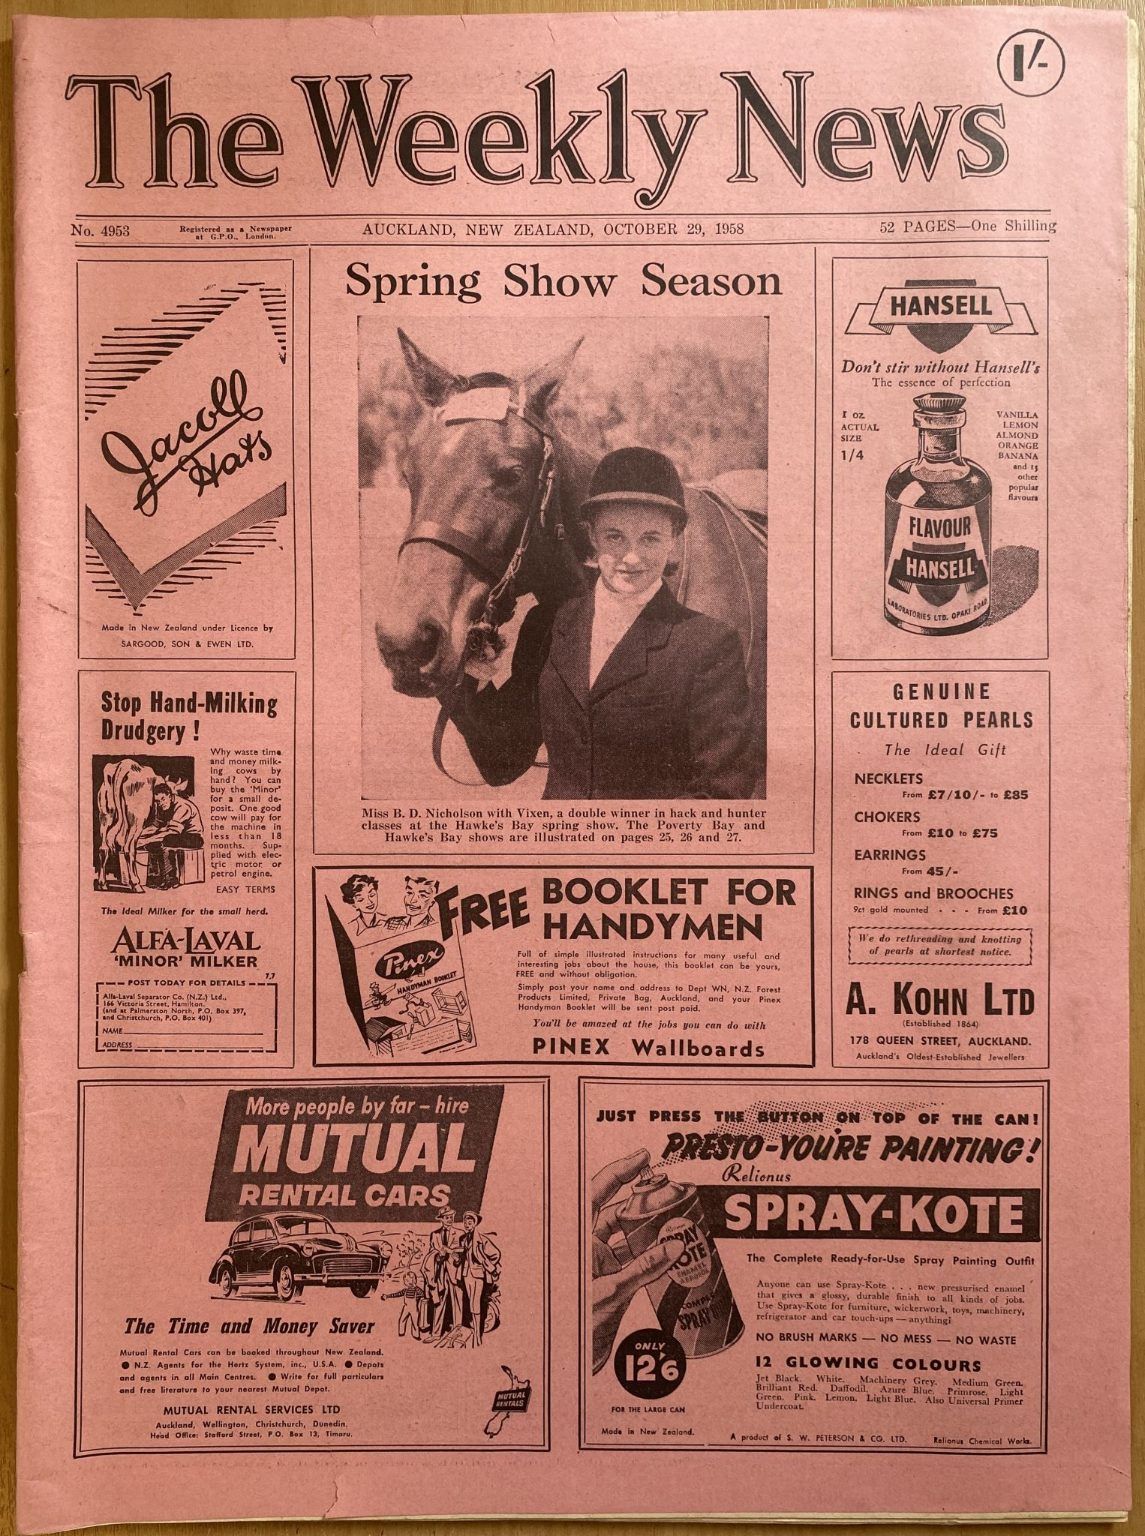 OLD NEWSPAPER: The Weekly News, No. 4953, 29 October 1958